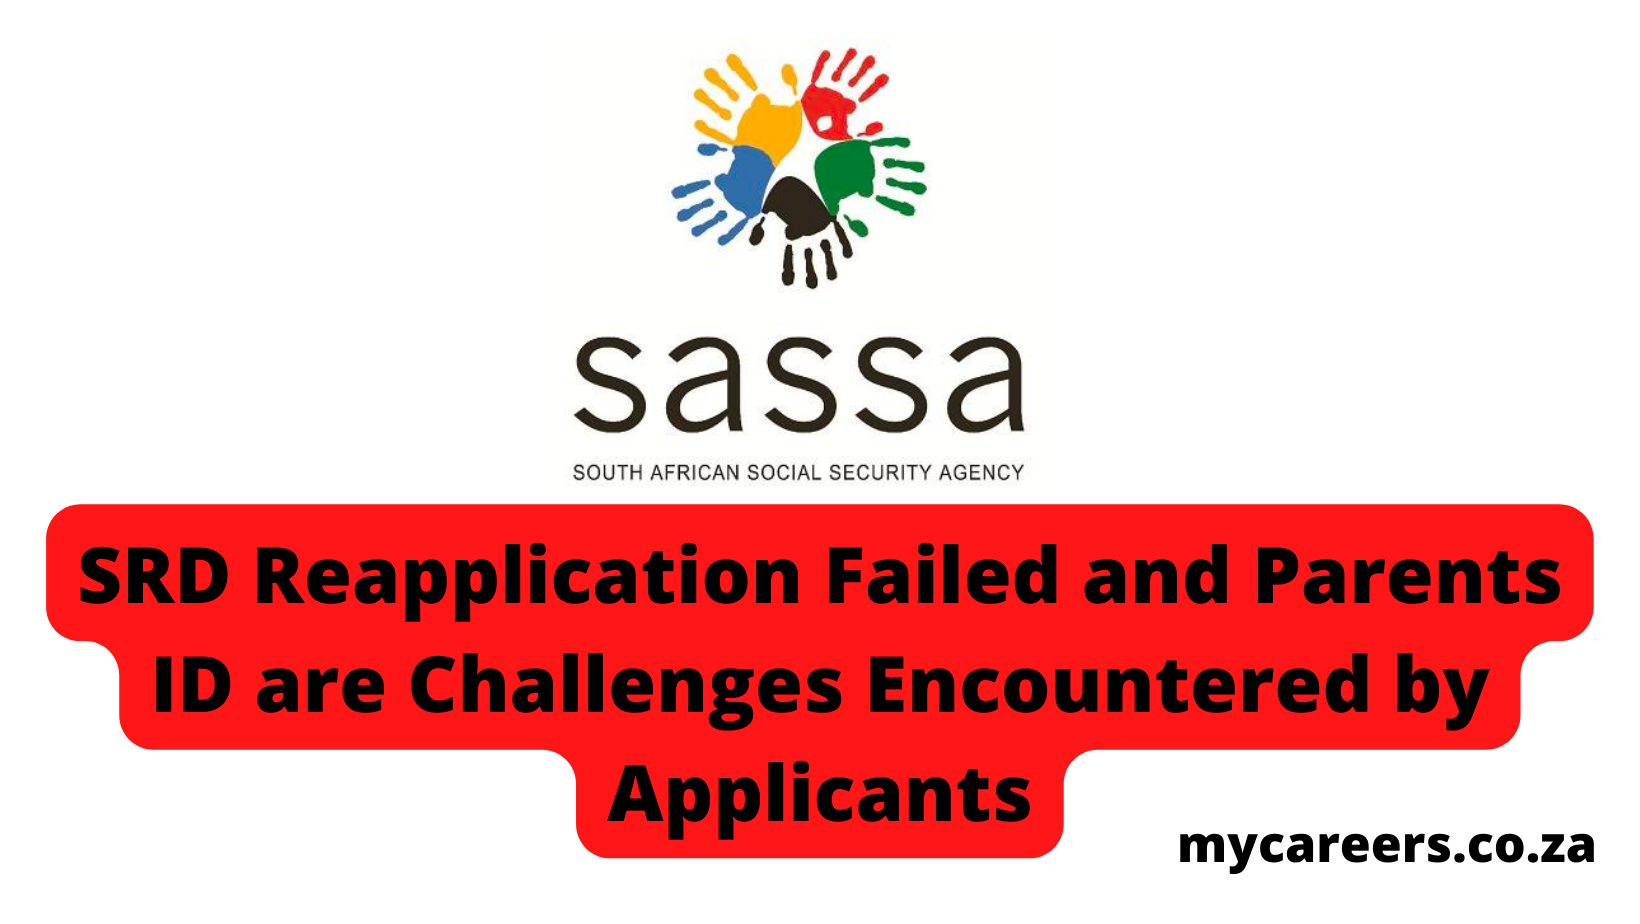 SRD Reapplication Failed and Parents ID are Challenges Encountered by Applicants